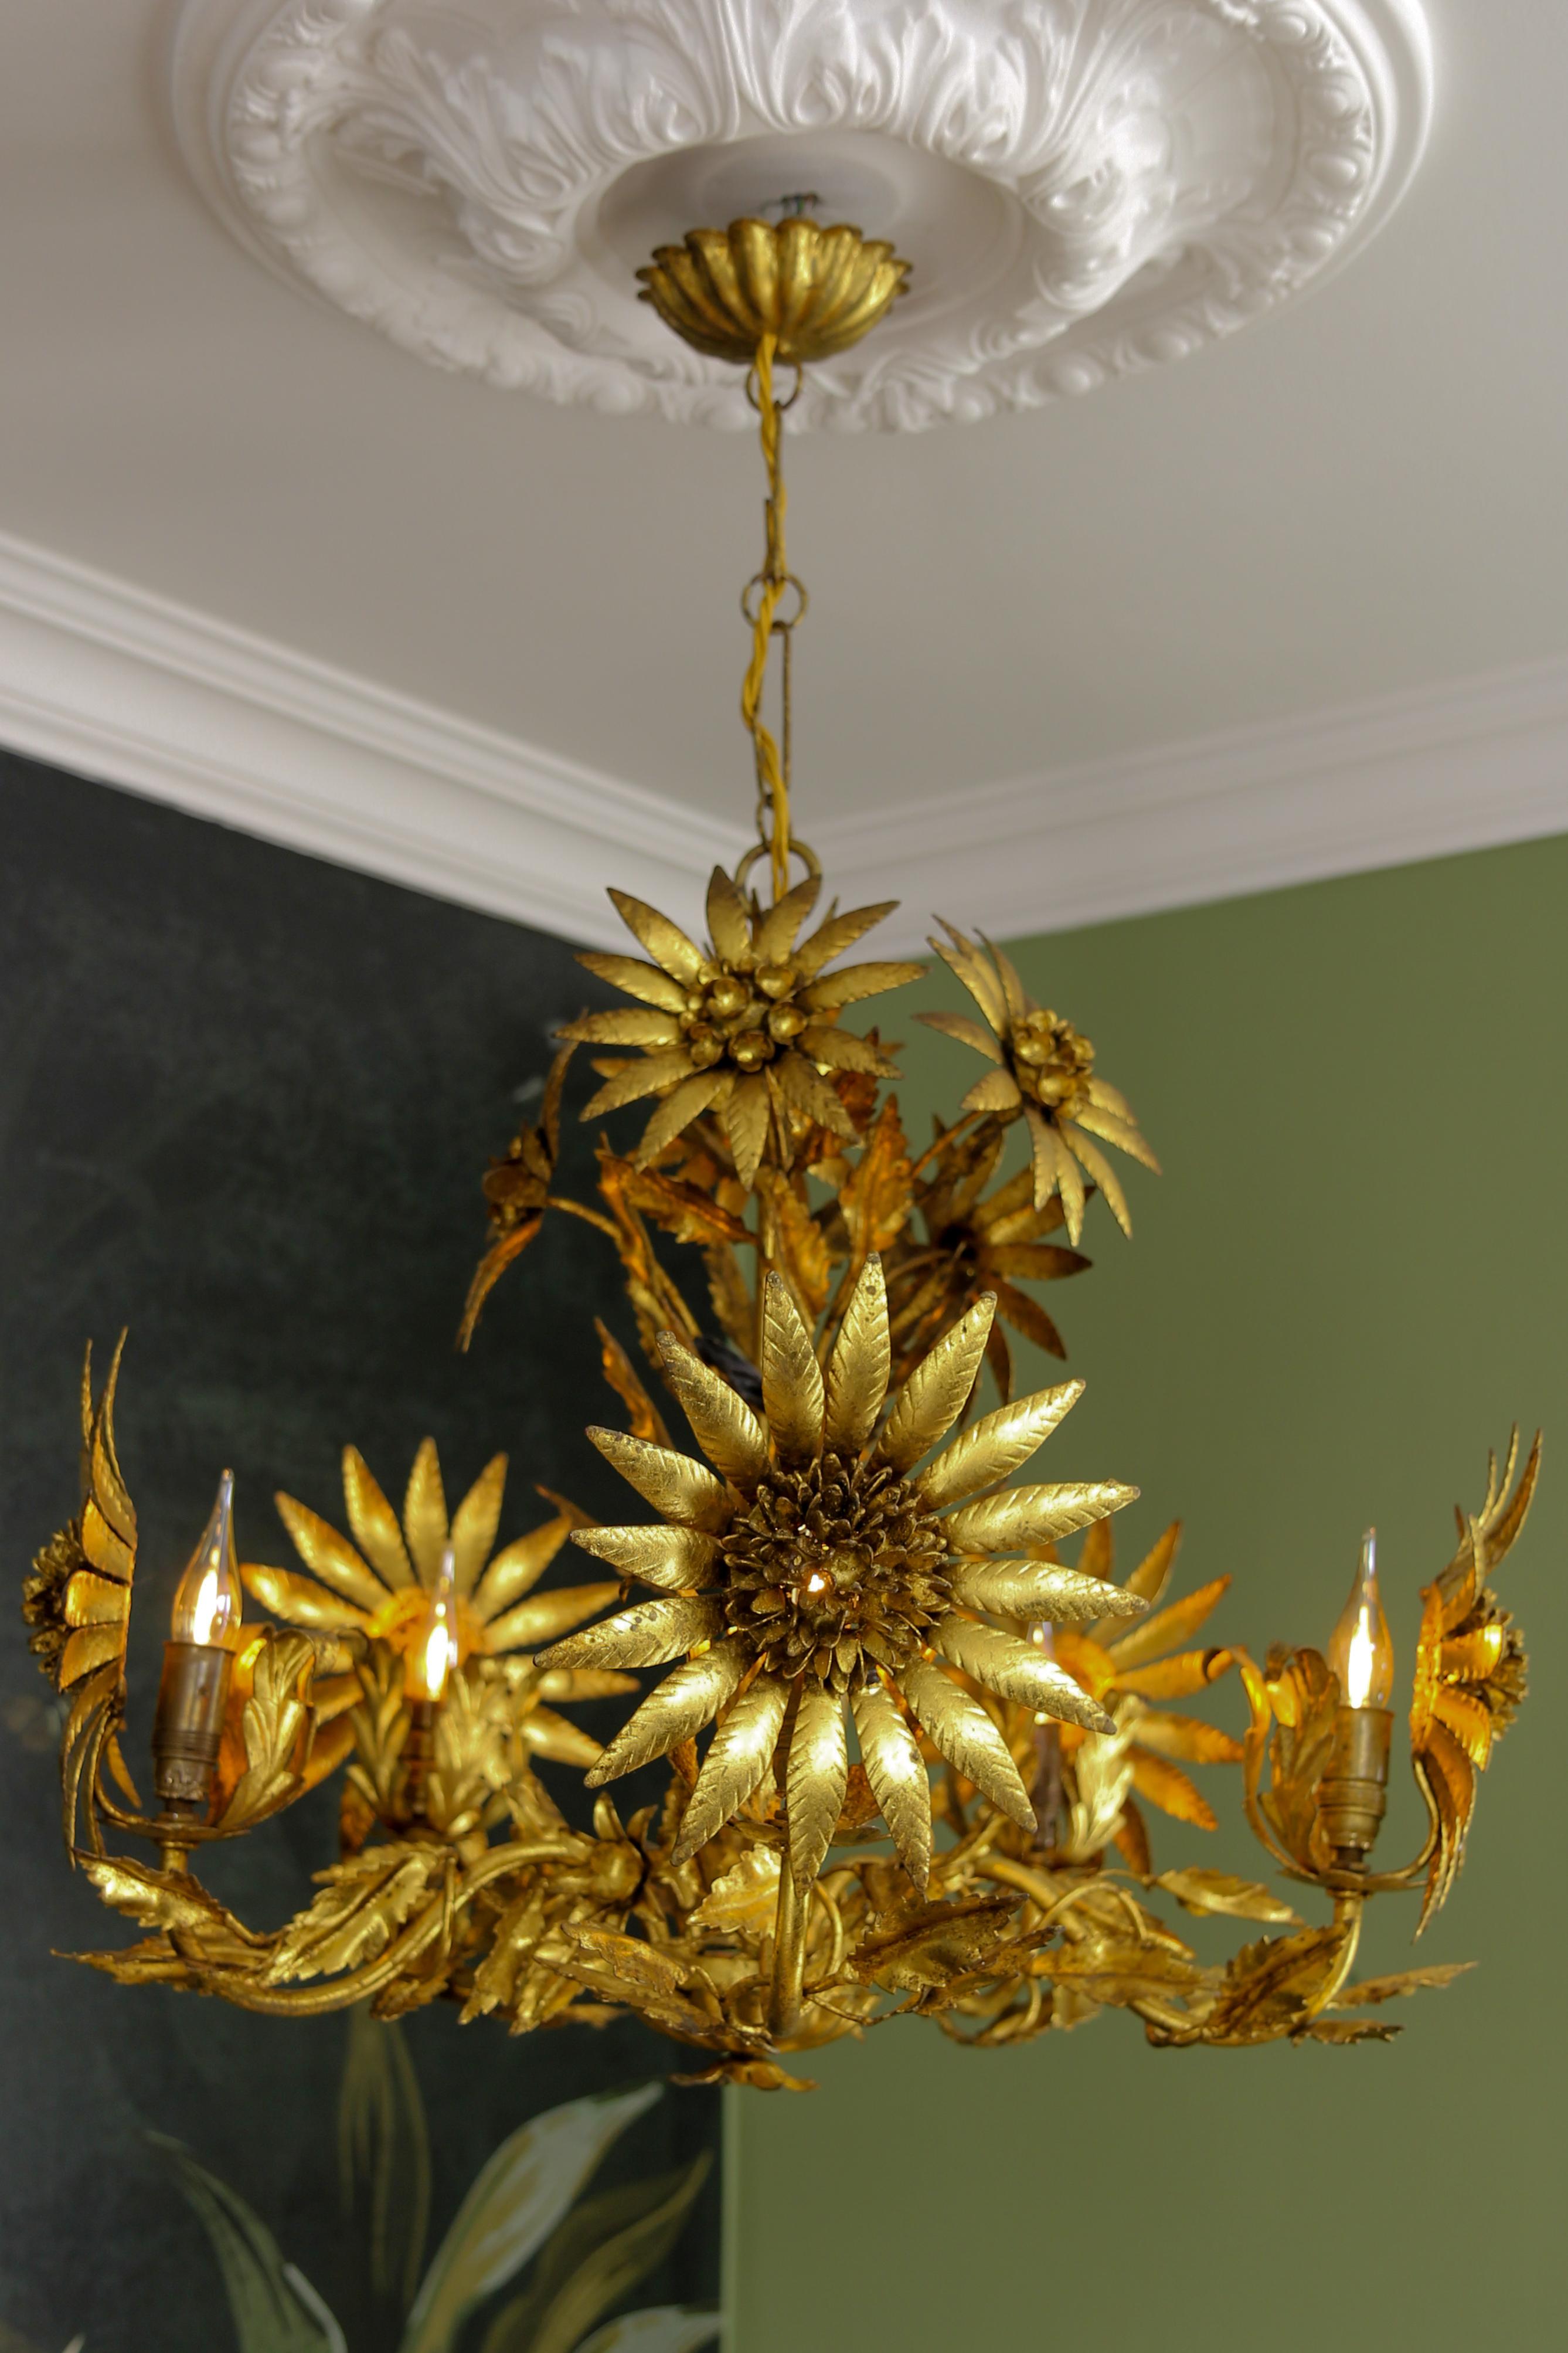 Hollywood Regency gilt metal flower five-light chandelier, attributed to Hans Kögl, from ca. the 1950s.
This exceptional and rare chandelier is made of gilt metal and is adorned with beautifully shaped large flowers, smaller flowers, and leaves.